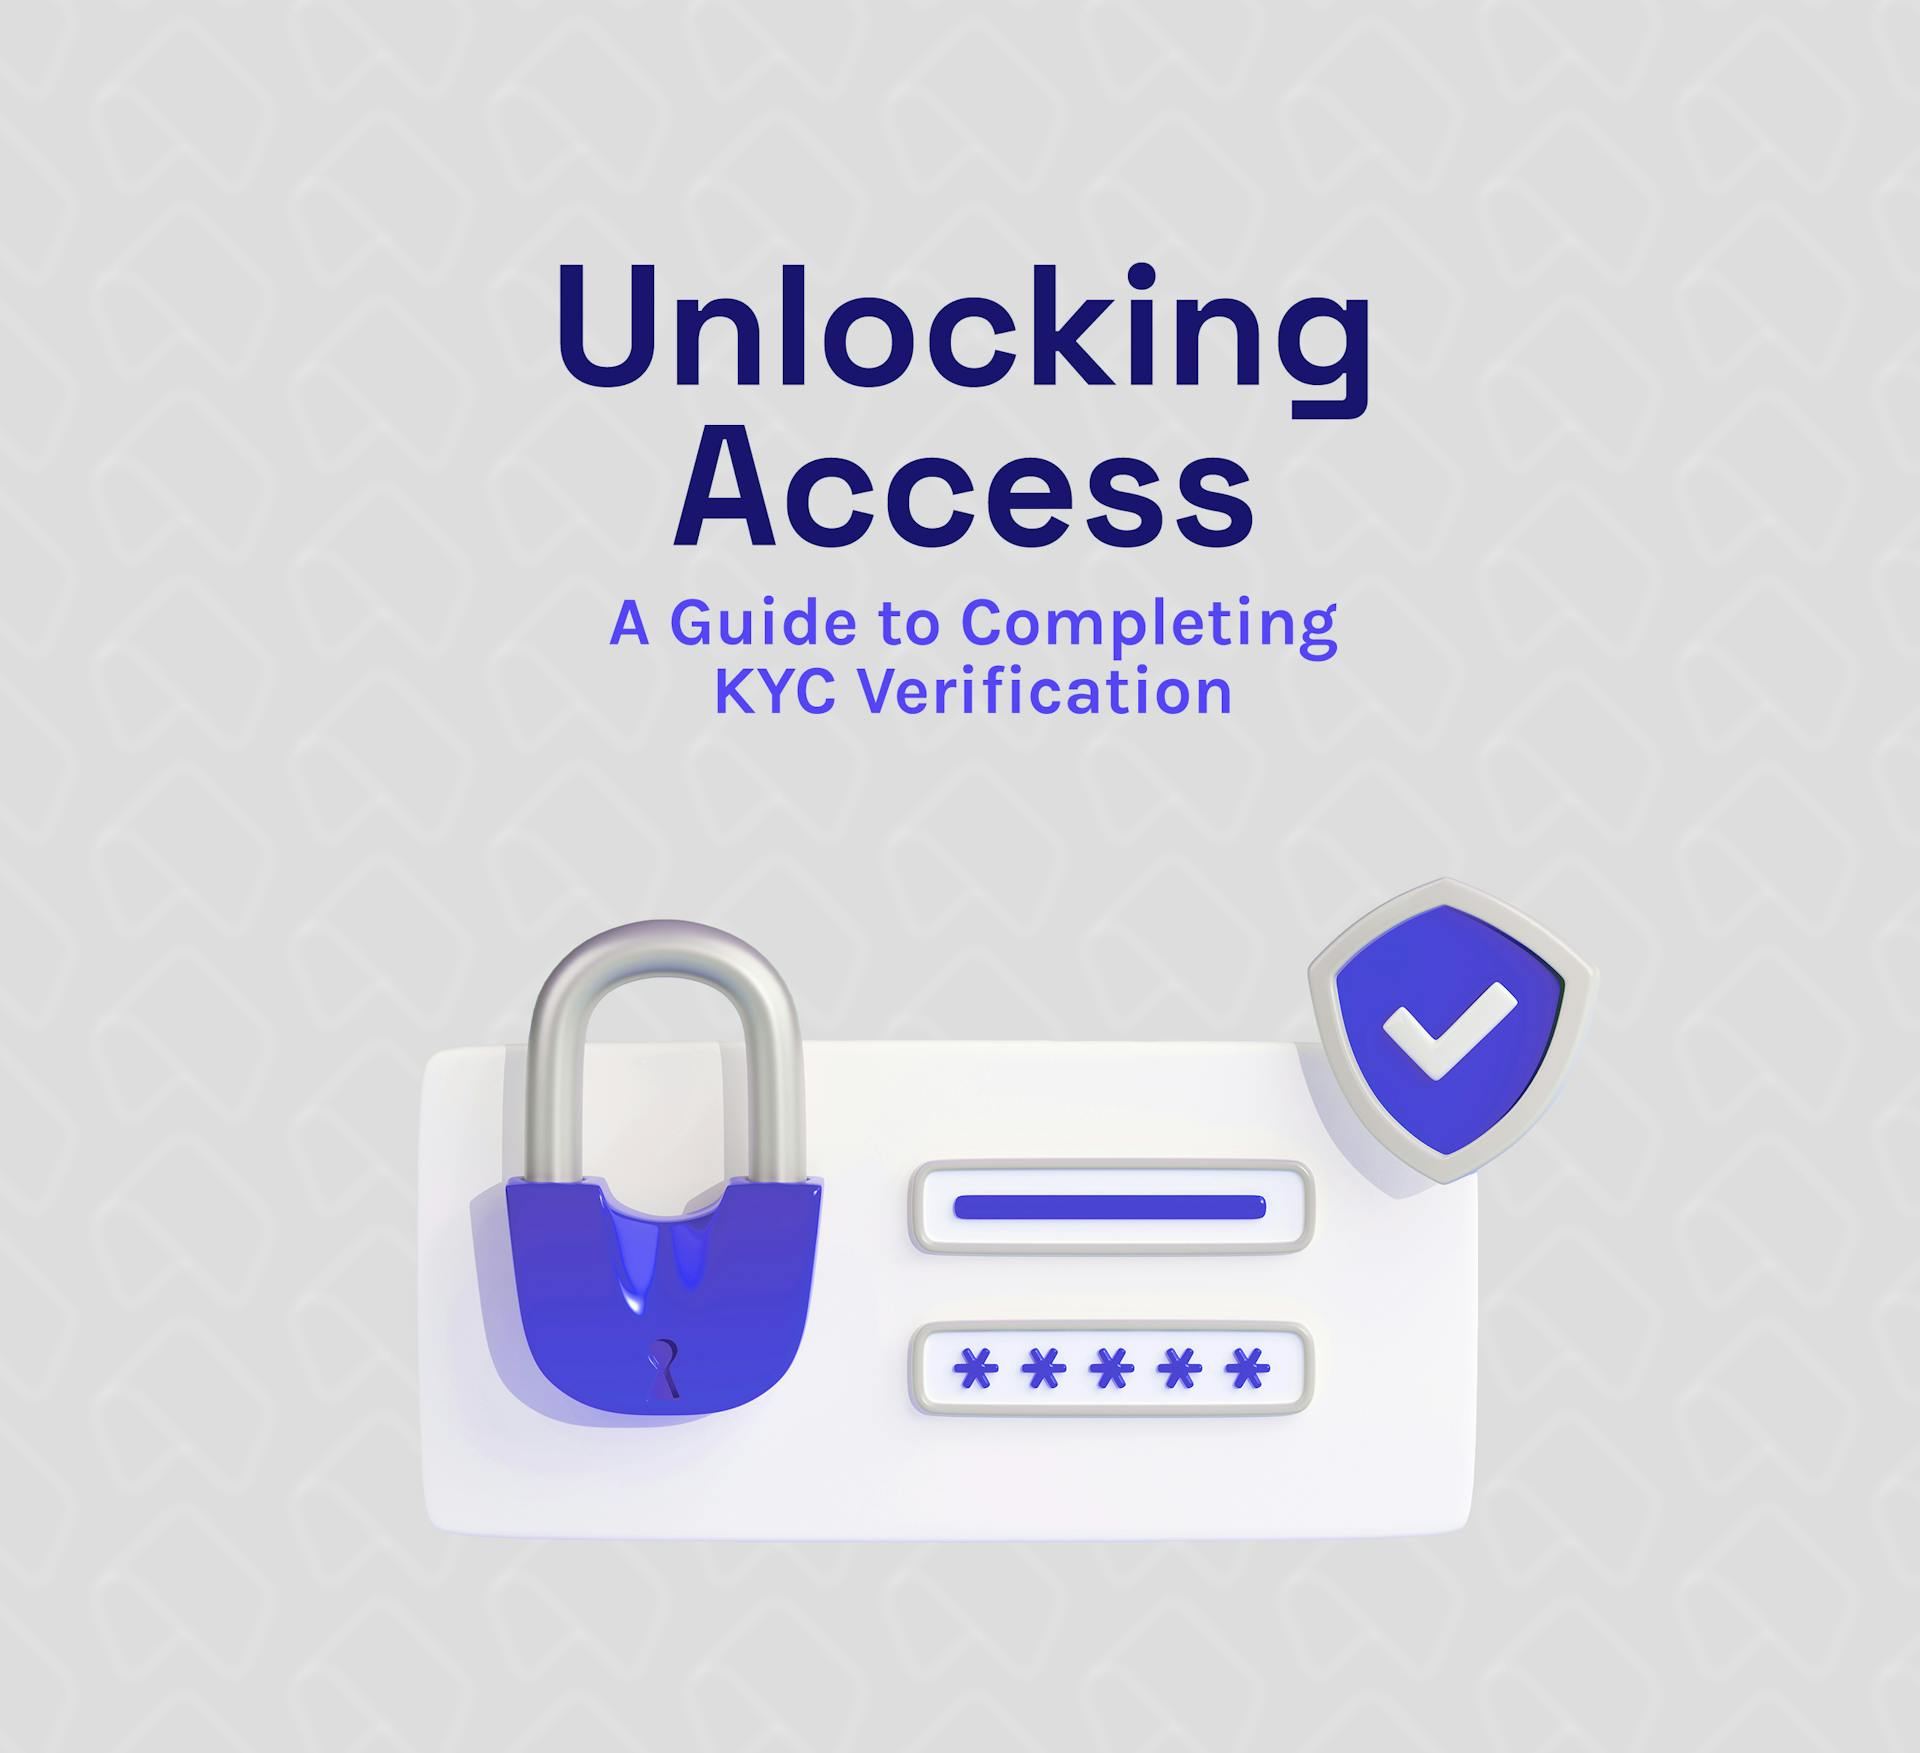 Unlocking Access: A Guide to Completing KYC Verification